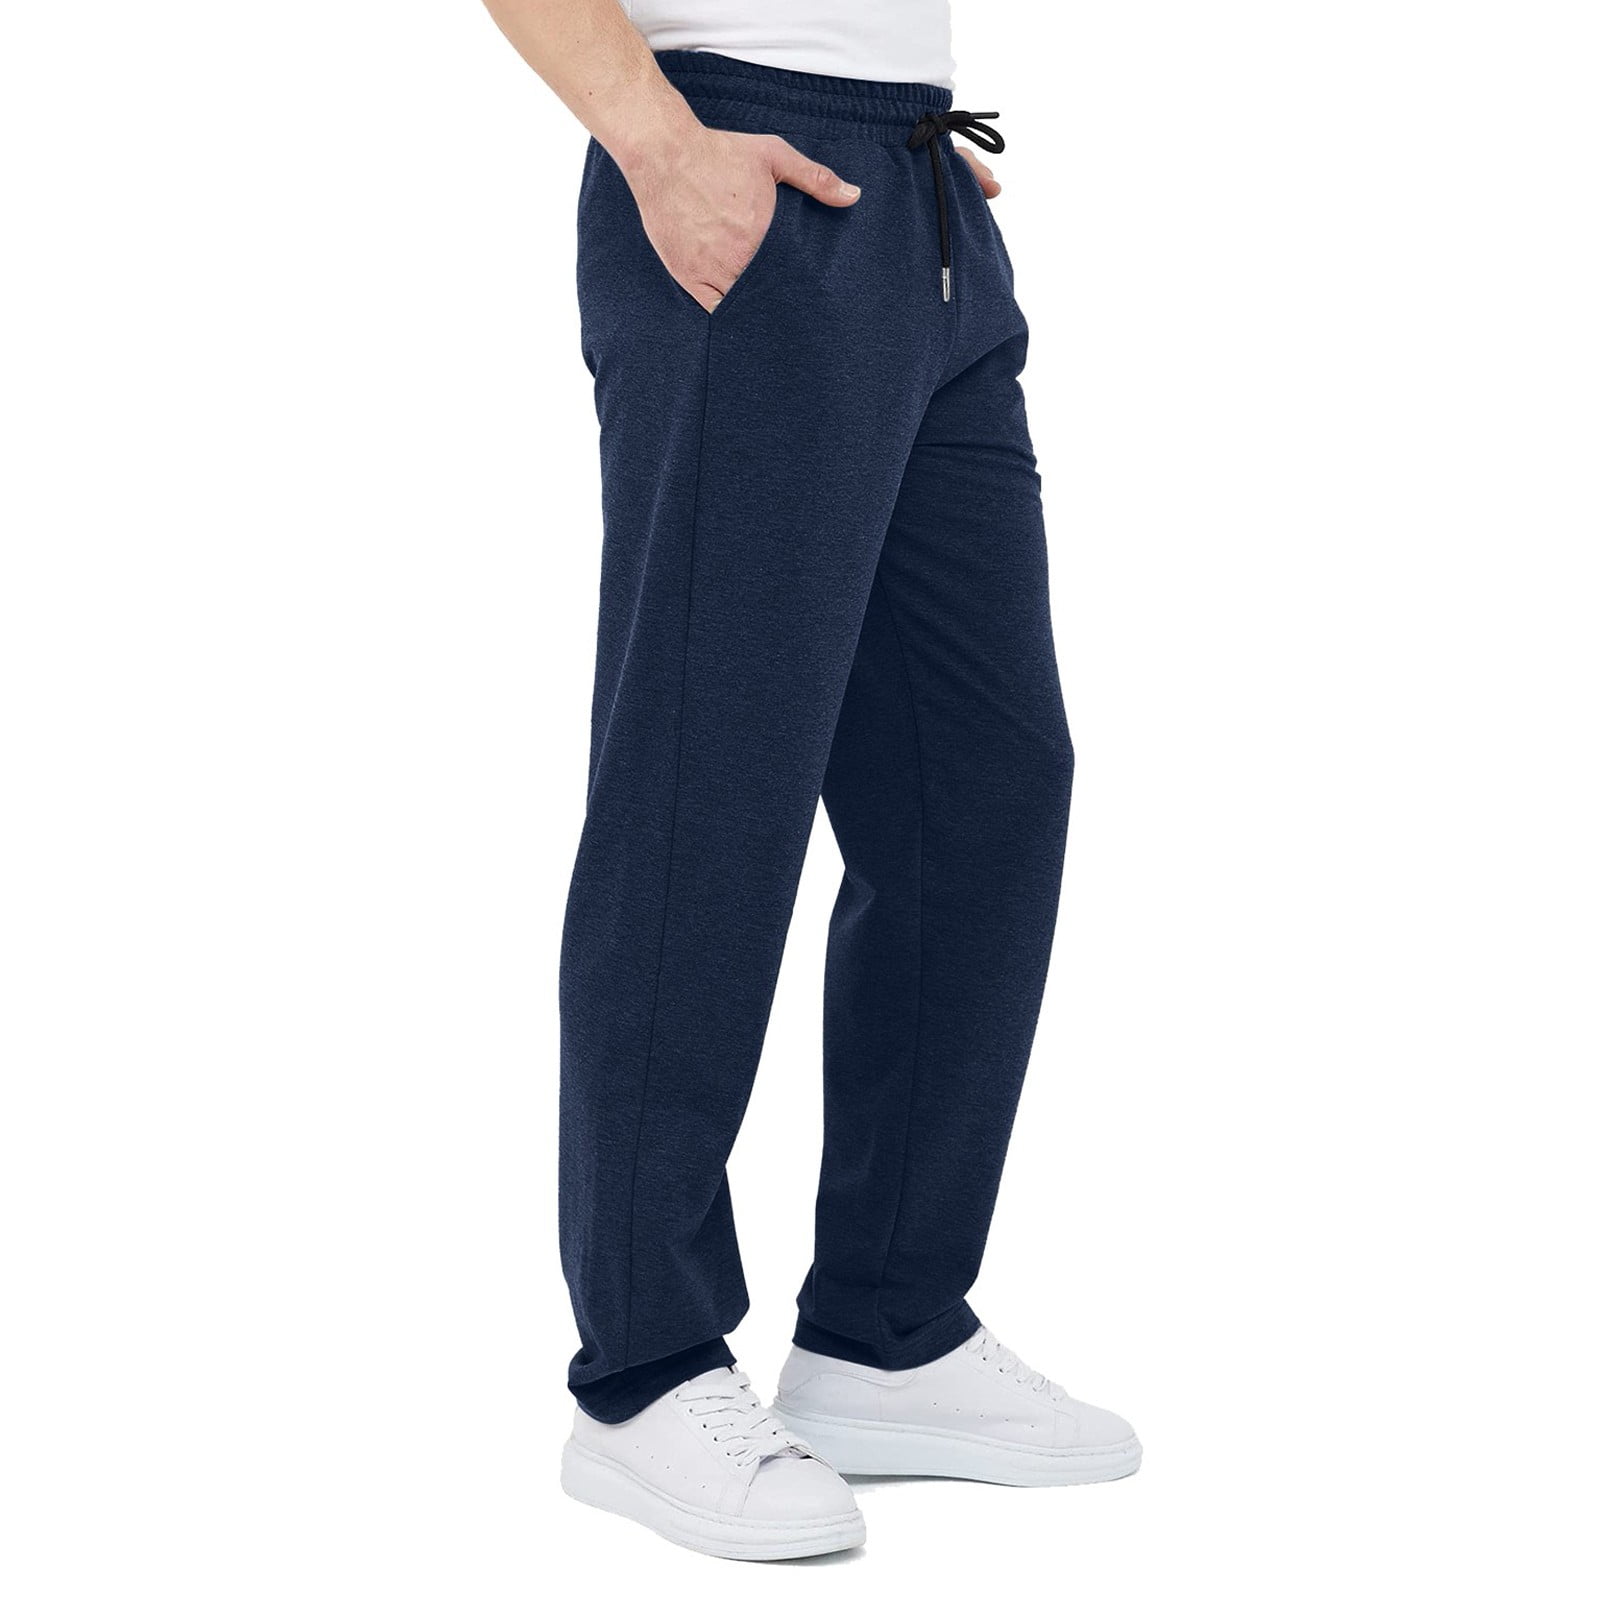 Trackpants: Shop Men Dark Grey5 Cotton Trackpants on Cliths